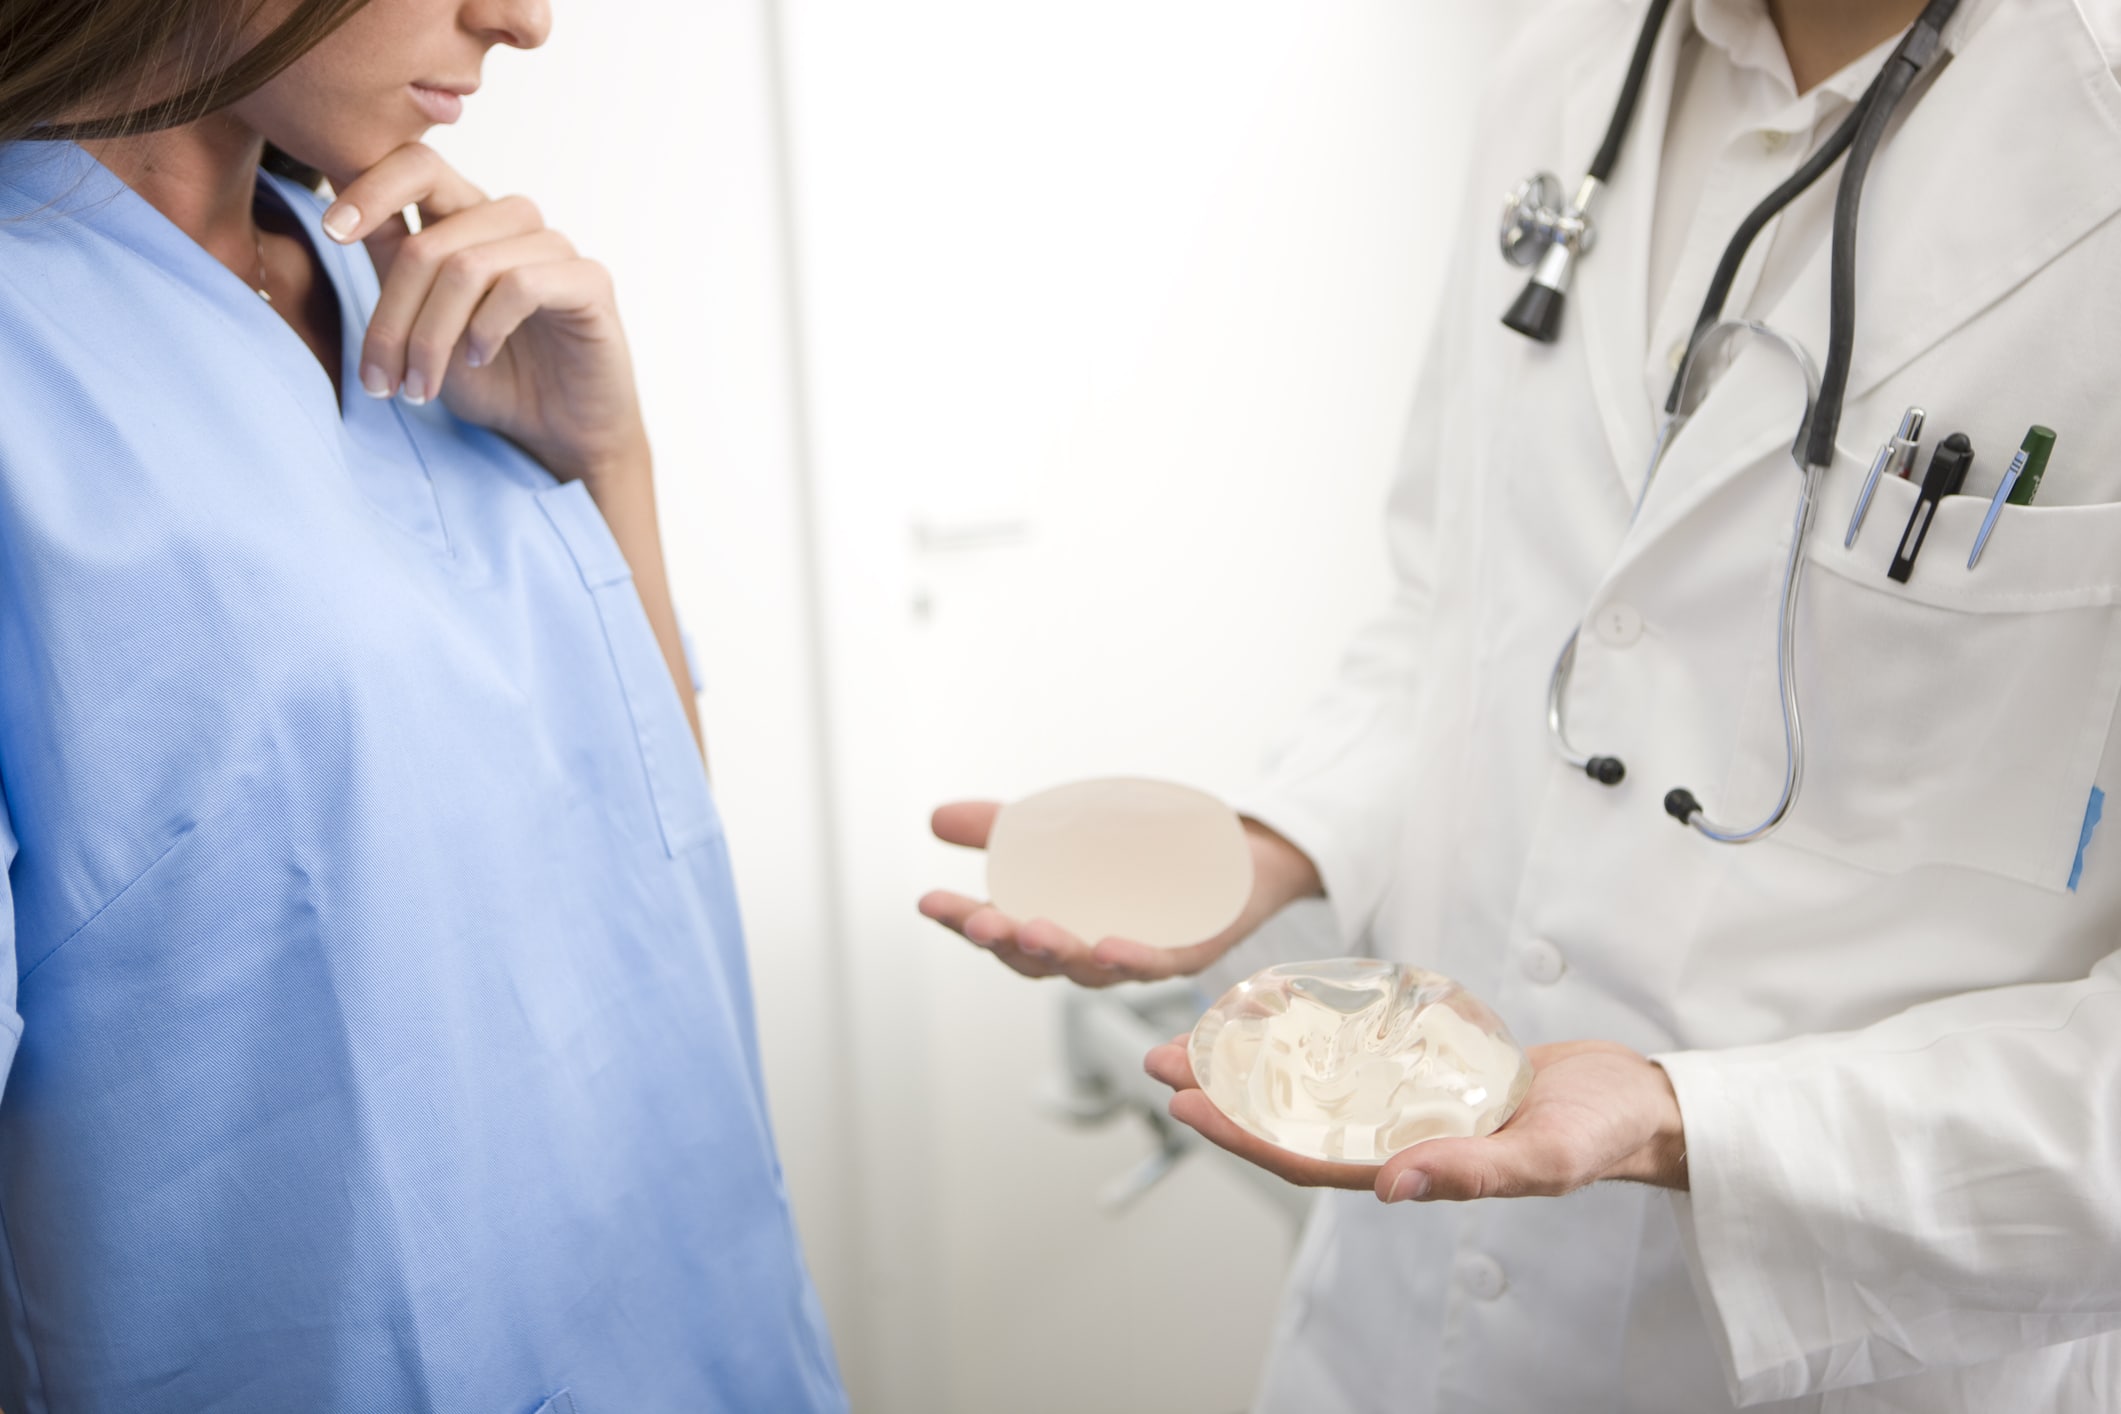 doctor showing patient breast implants, holding one in each hand, one saline, one silicon